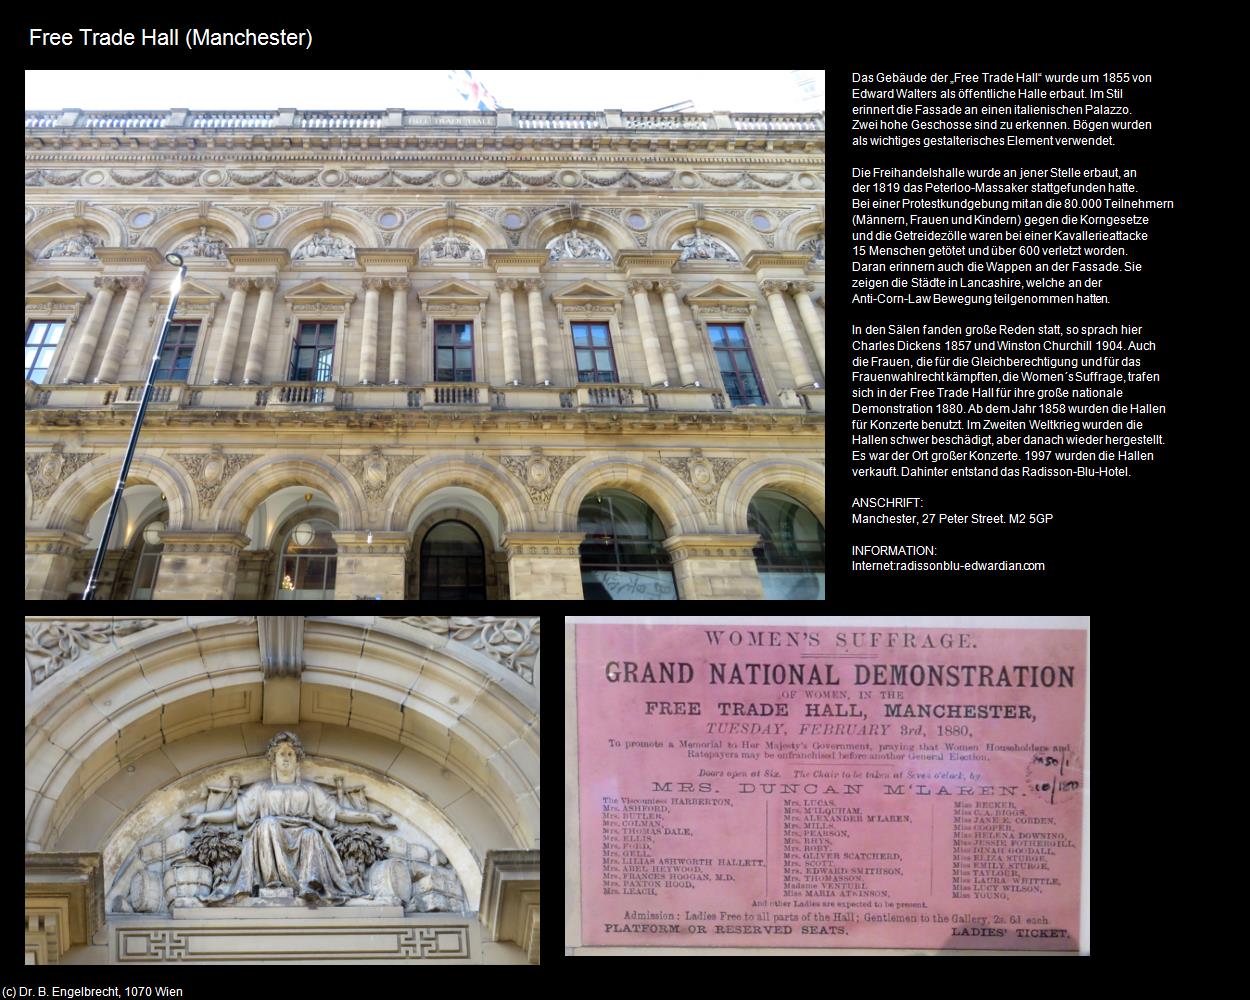 Free Trade Hall  (Manchester, England  ) in Kulturatlas-ENGLAND und WALES